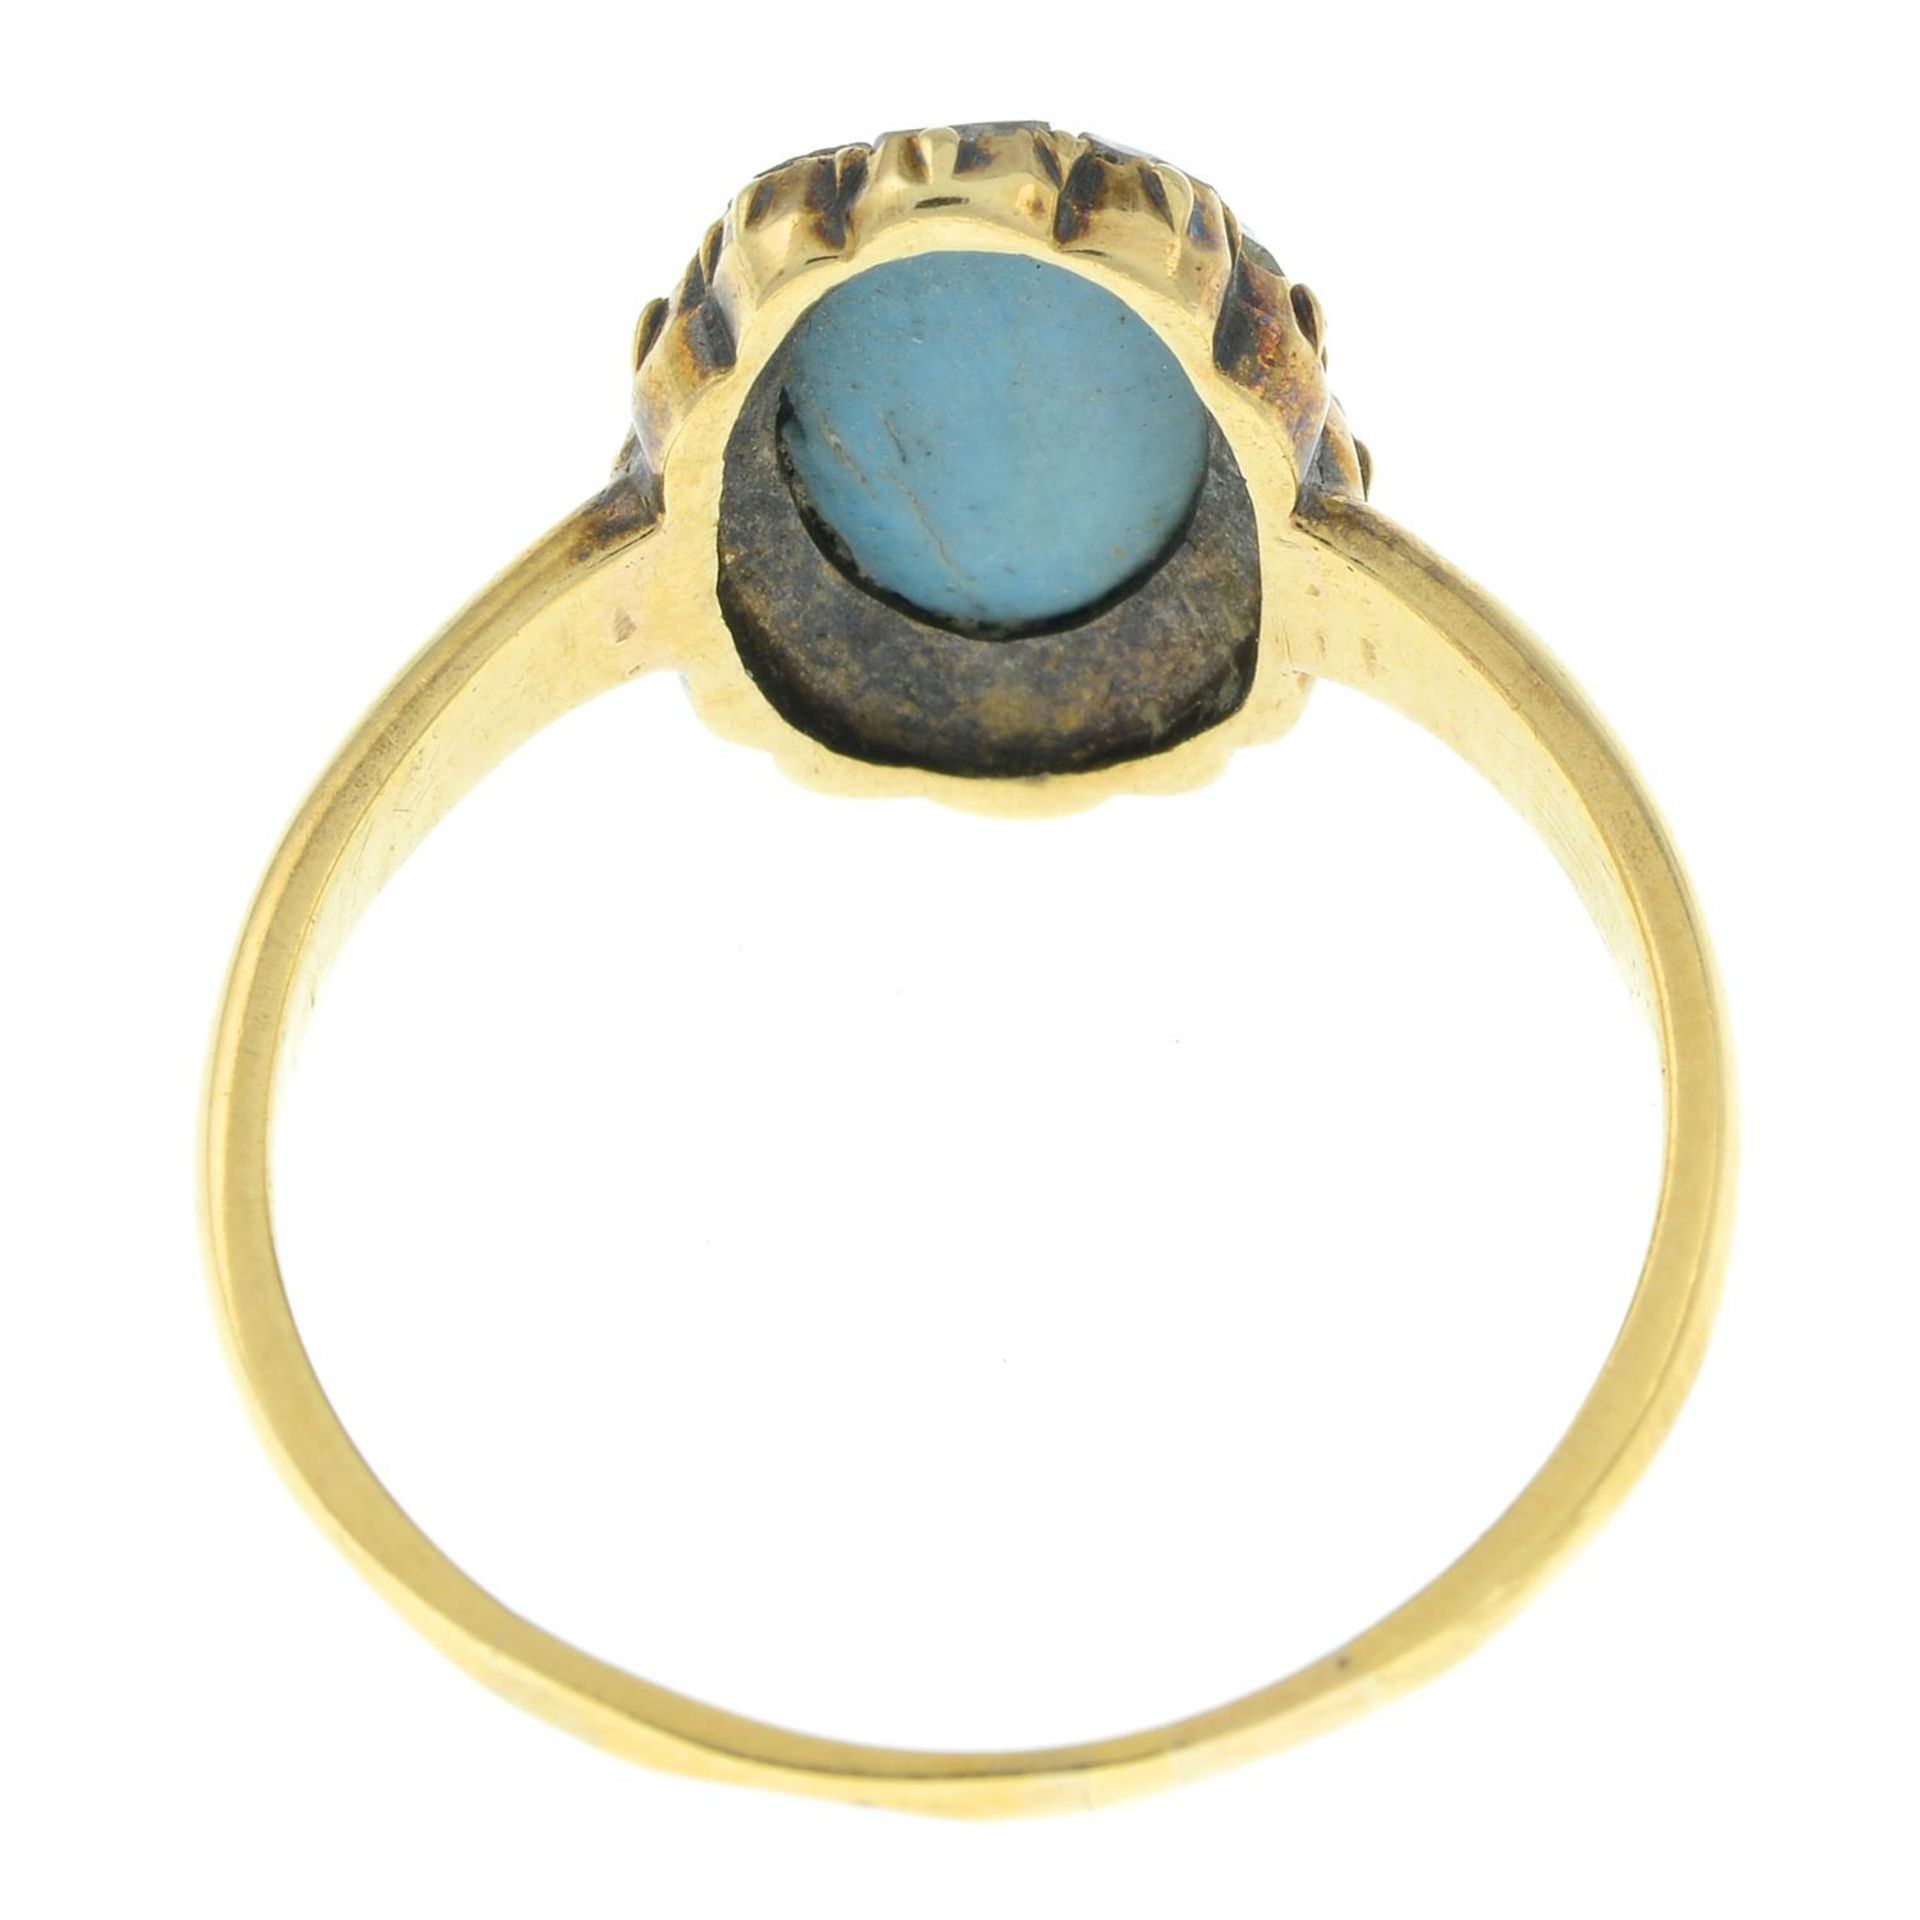 Victorian 15ct gold turquoise and diamond ring - Image 2 of 2